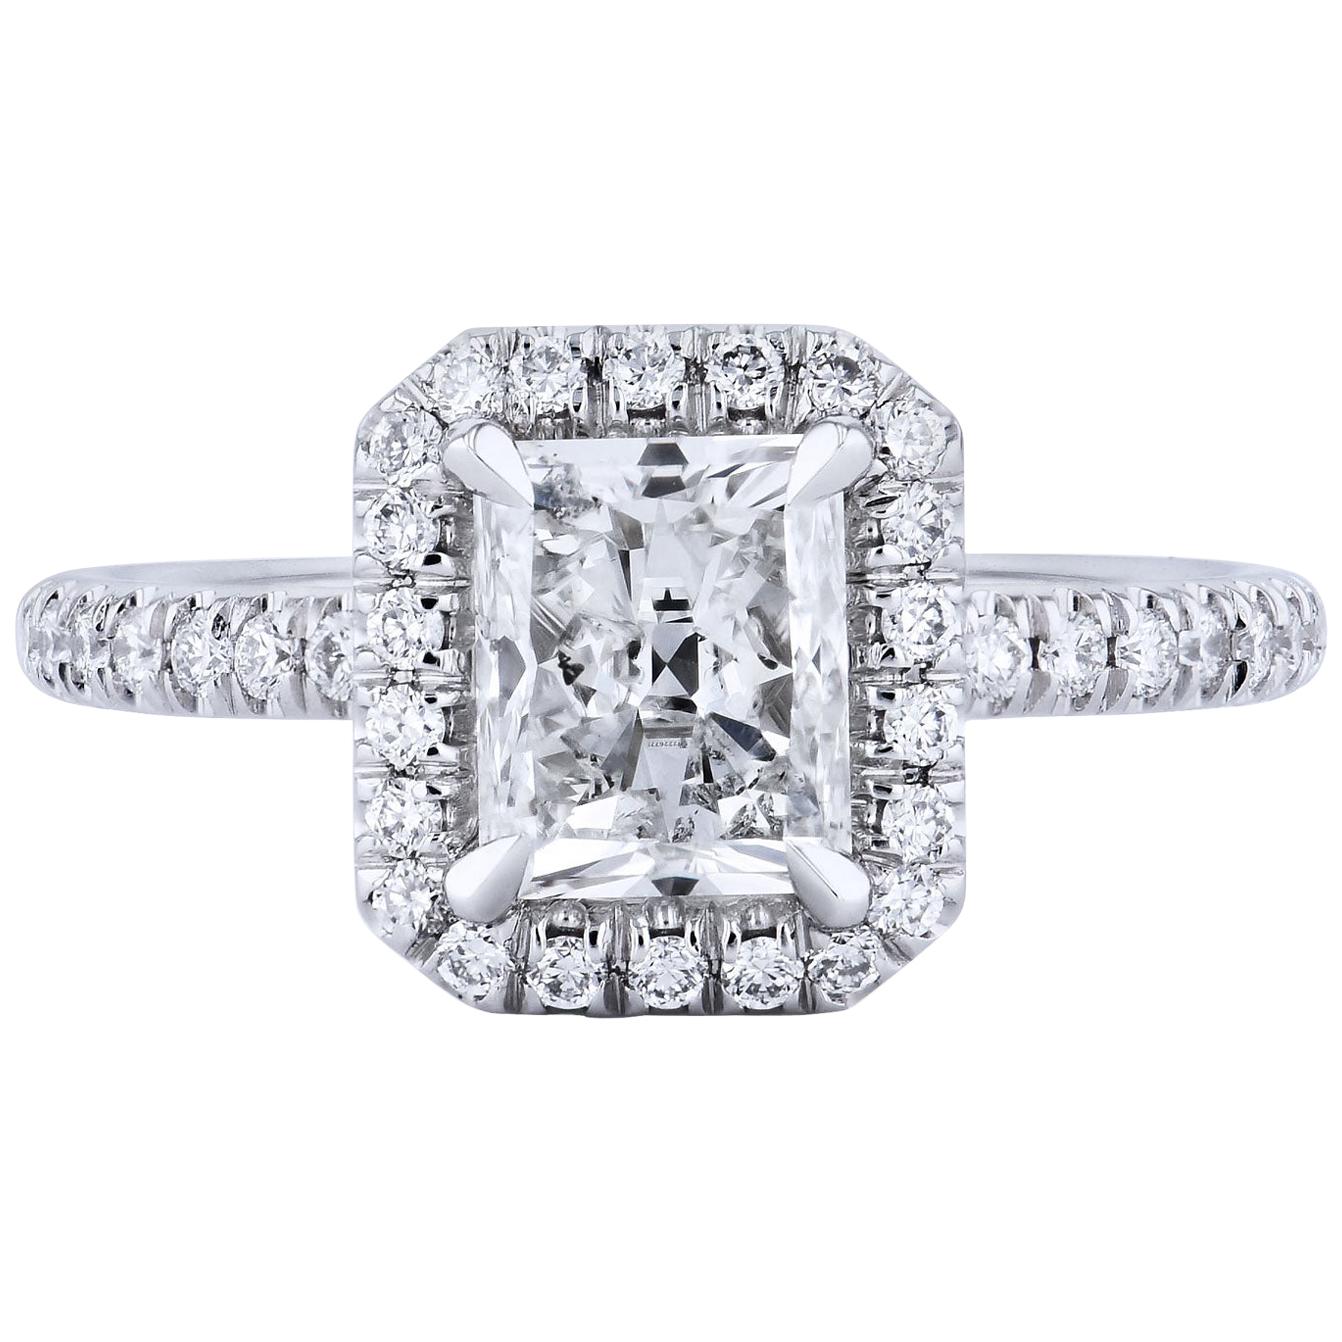 GIA Certified 1.50 Carat Radiant Cut Diamond Engagement Ring w/ a Pave Set Halo